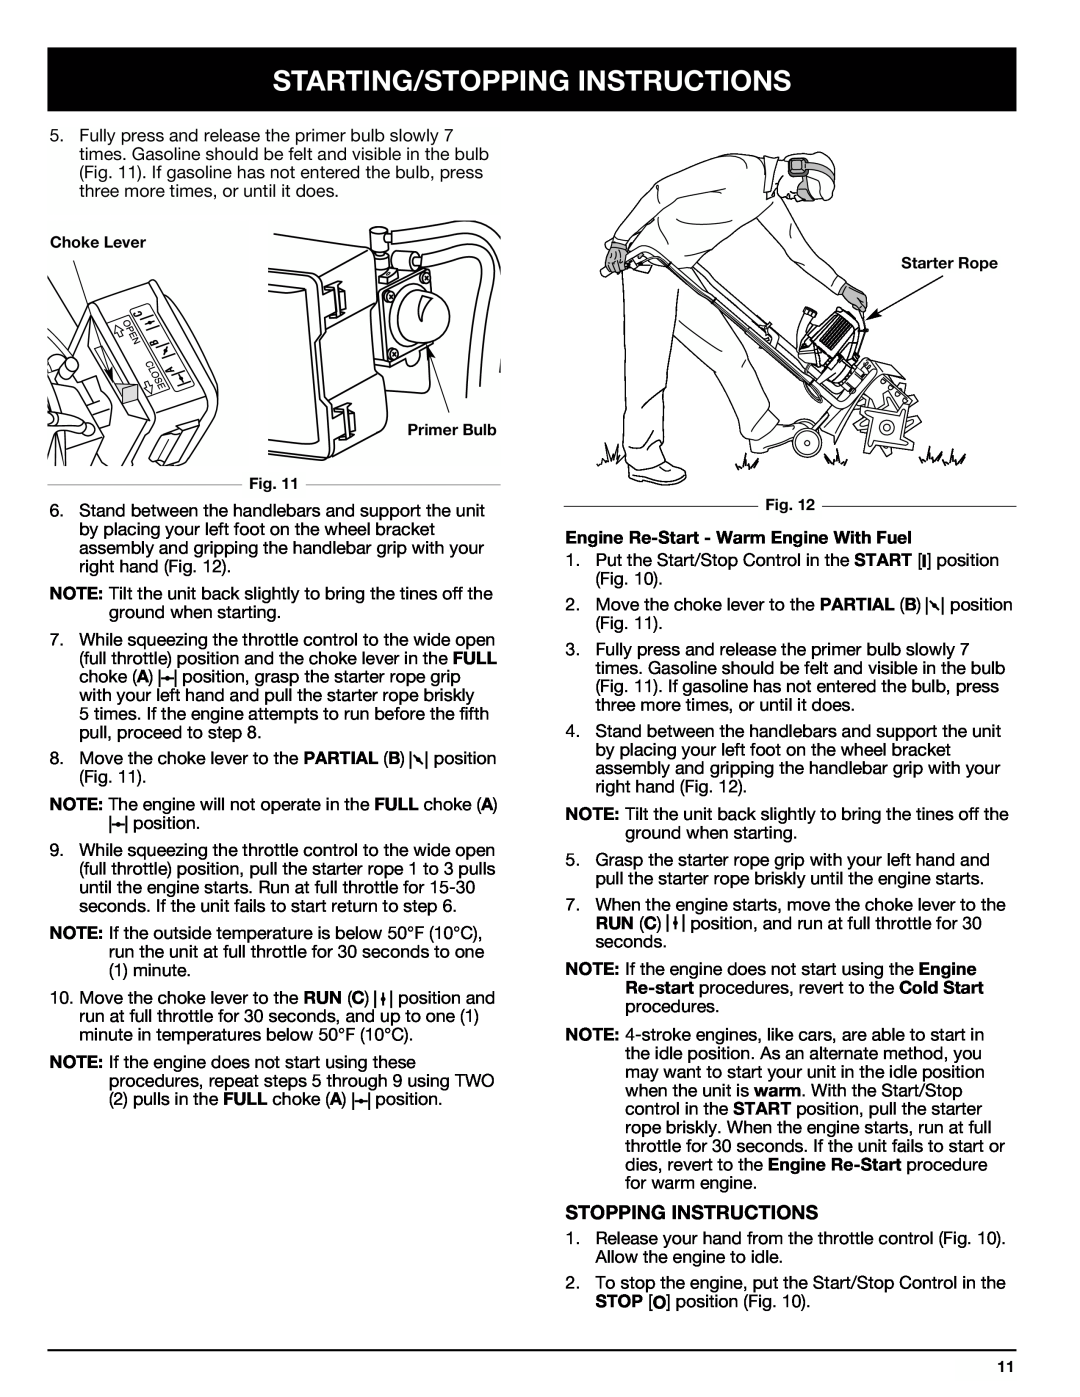 Ryobi Outdoor 510r manual Starting/Stopping Instructions, Engine Re-Start - Warm Engine With Fuel 